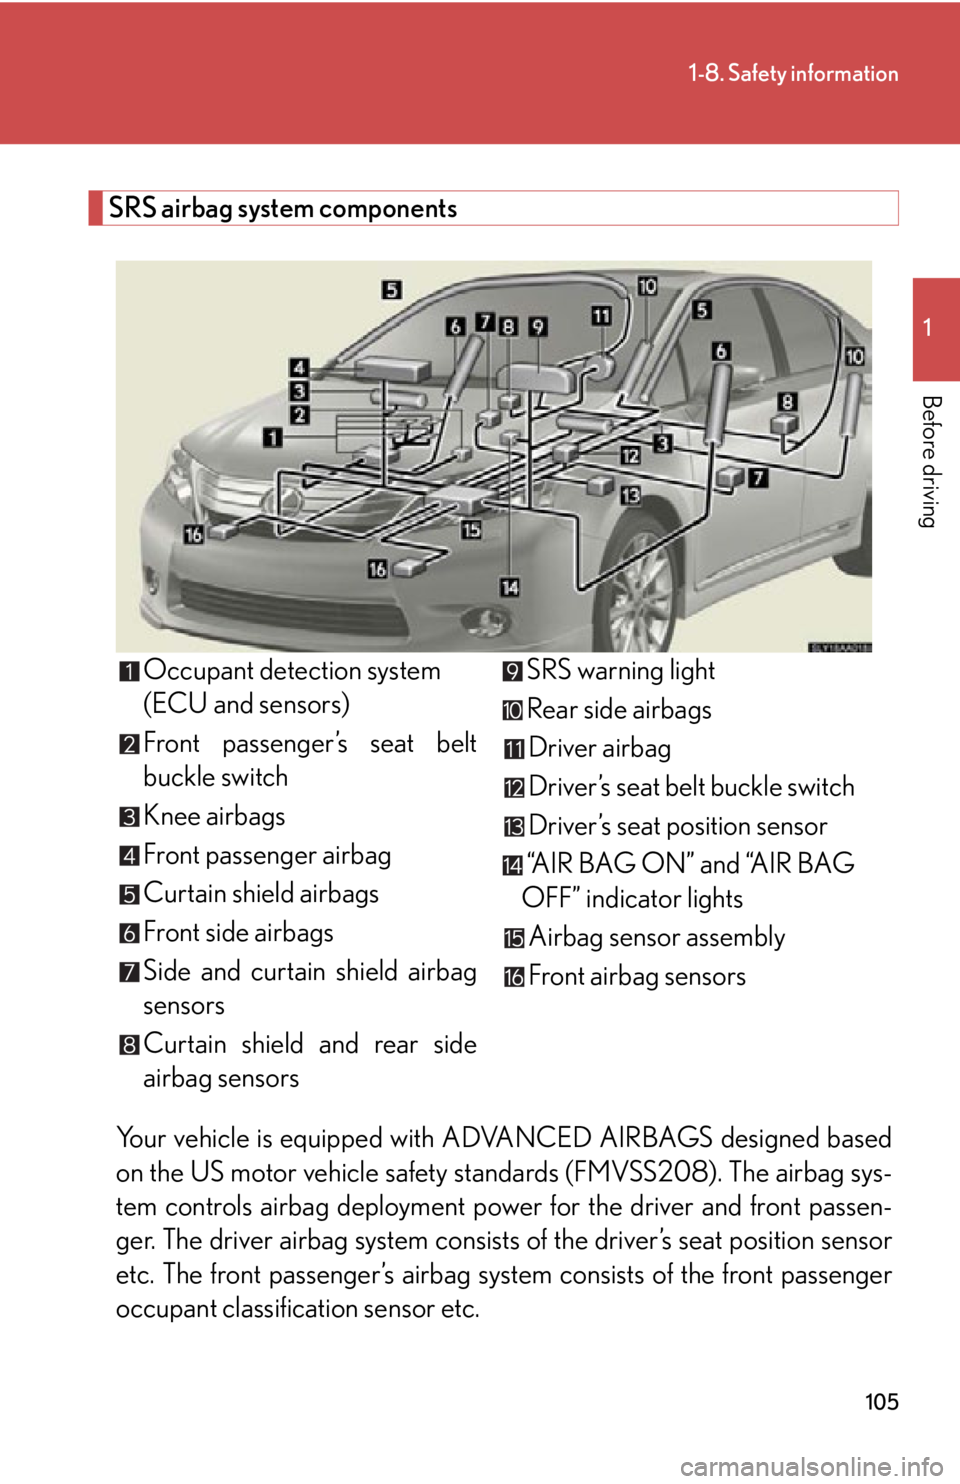 Lexus HS250h 2010  Basic Information Before Operation / LEXUS 2010 HS250H OWNERS MANUAL (OM75006U) 105
1-8. Safety information
1
Before driving
SRS airbag system components
Your vehicle is equipped with ADVANCED AIRBAGS designed based 
on the US motor vehicle safety standards (FMVSS208). The airbag